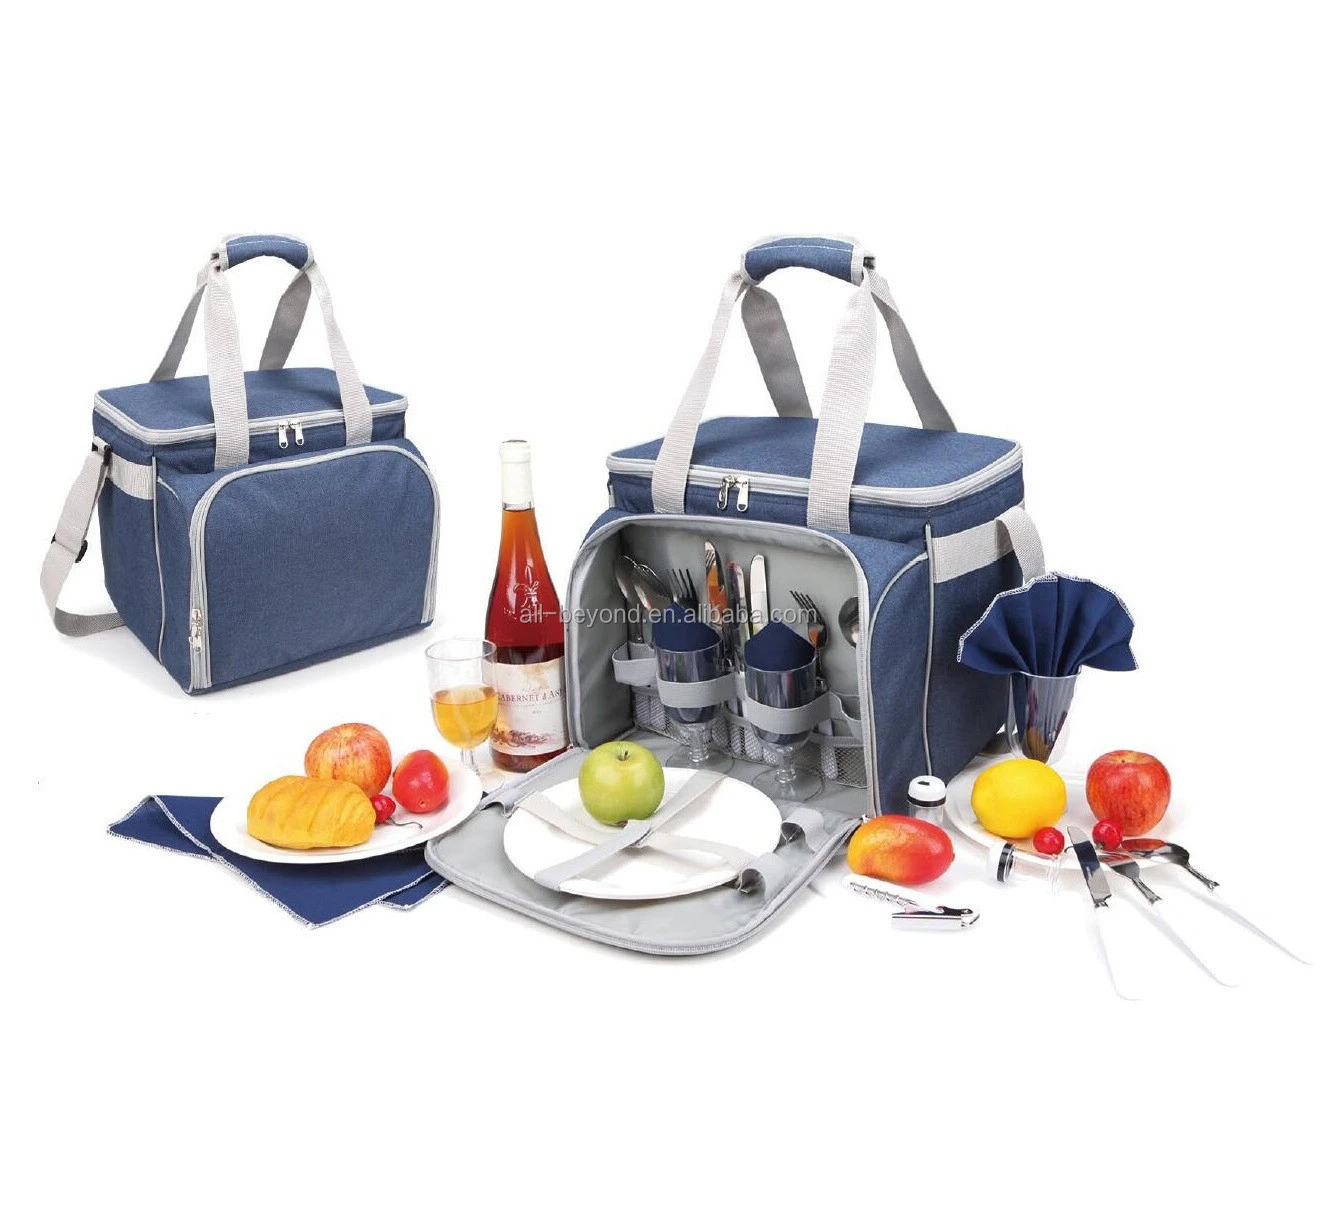 Outdoor Deluxe Picnic Backpack for 4 Person Picnic Basket Bag w/ Cooler Compartment (RPB 2046)